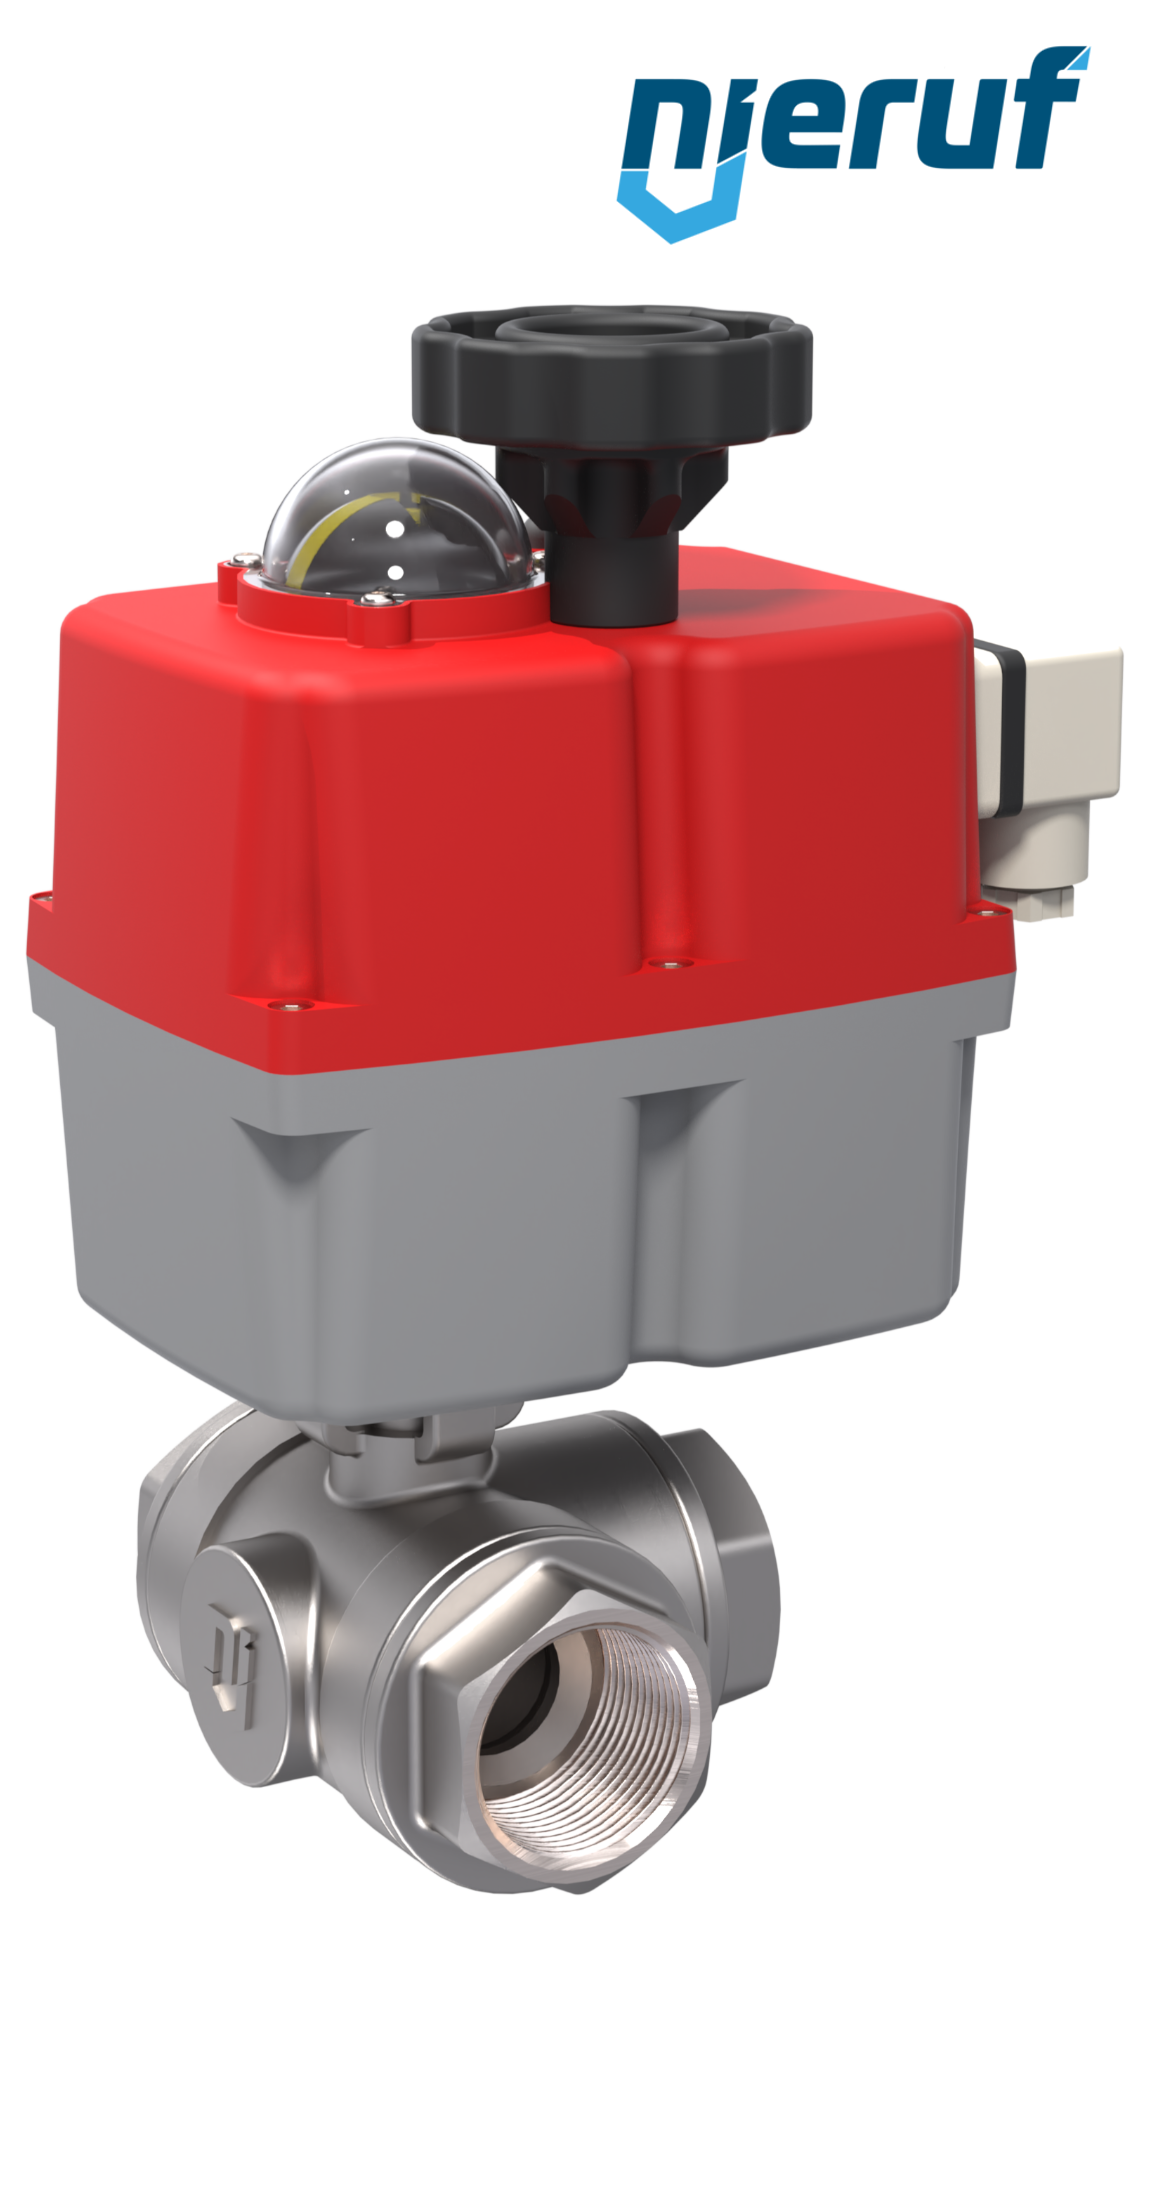 3 way automatic-ball valve 24-240V DN15 - 1/2" inch stainless steel reduced port design with L drilling